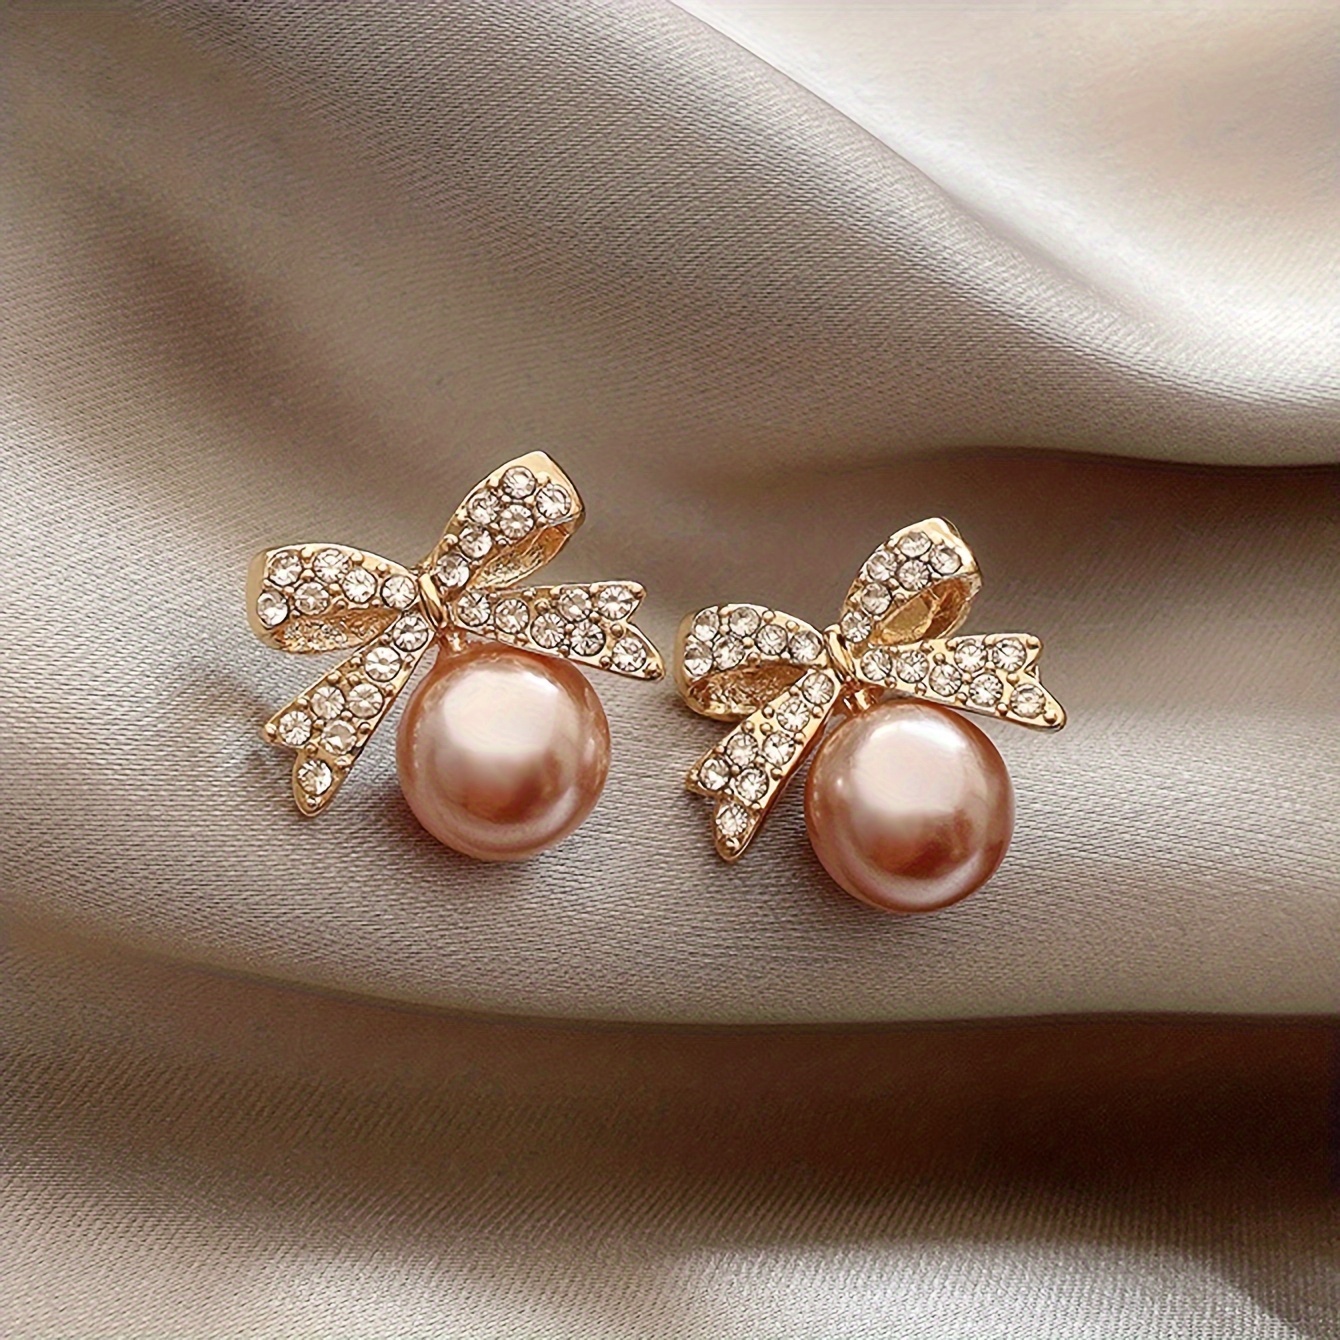 

Delicate Bow With Imitation Pearl Design Stud Earrings Alloy Jewelry Embellished With Rhinestones Vintage Elegant Style Dating Earrings